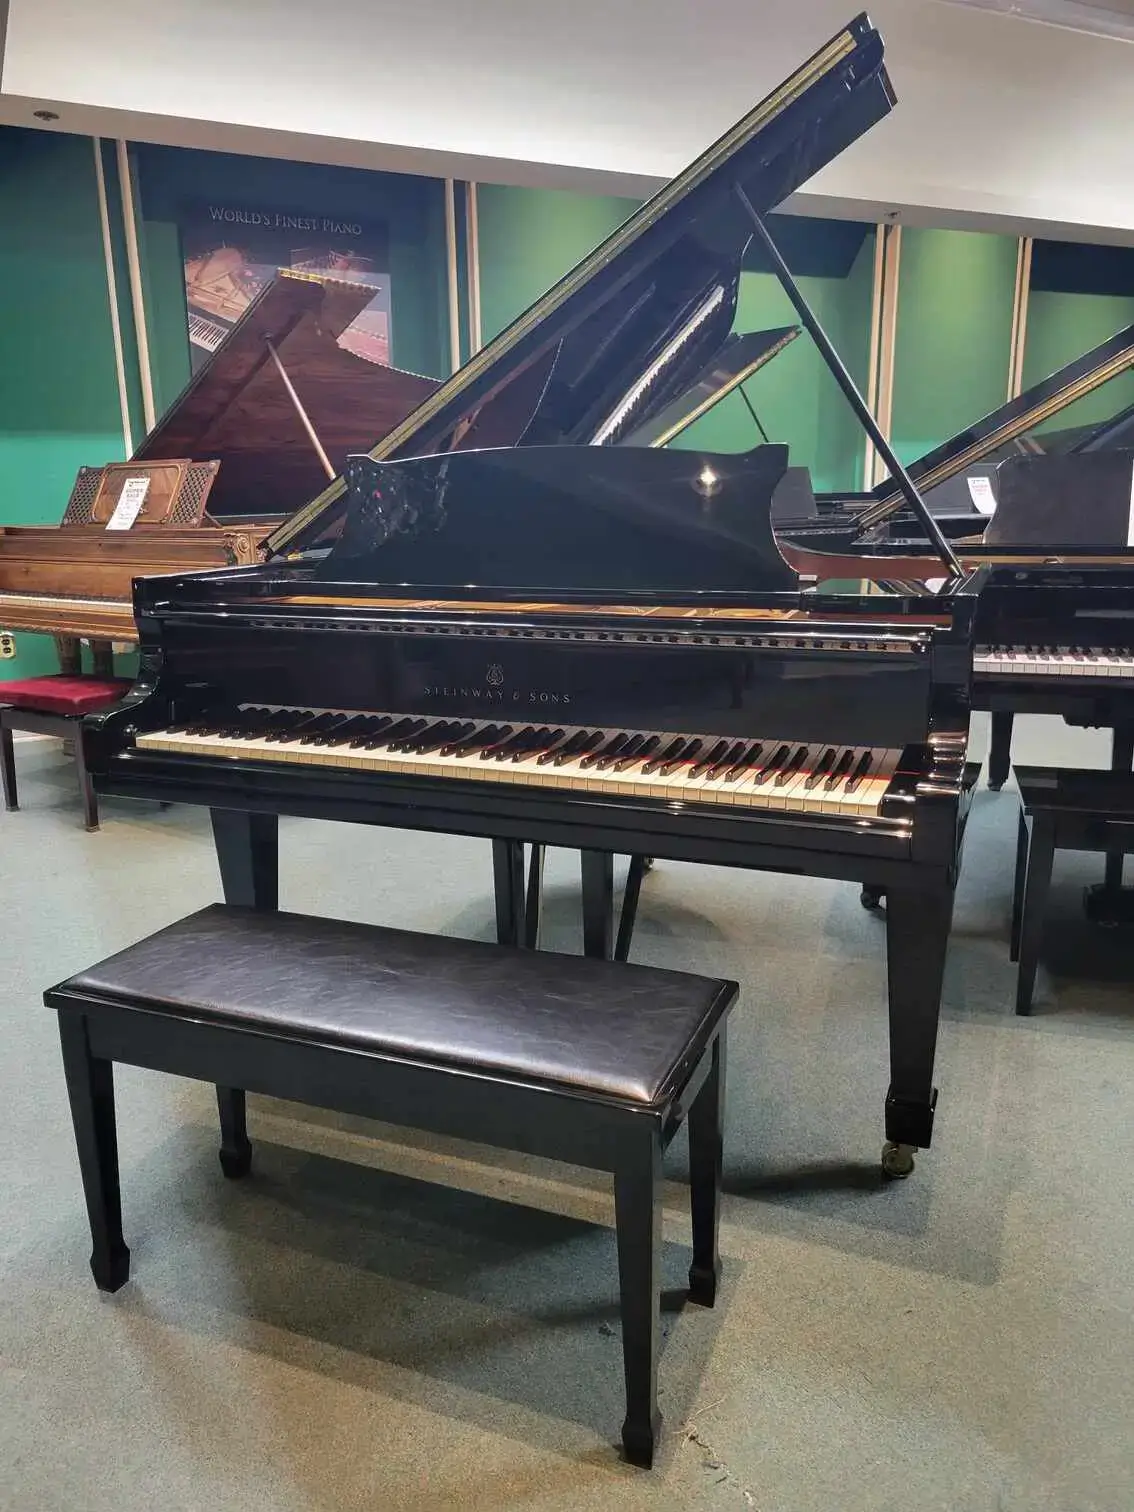 This is a detailed image displaying a 1983 Steinway Hamburg O-180 Professional Grand Piano.